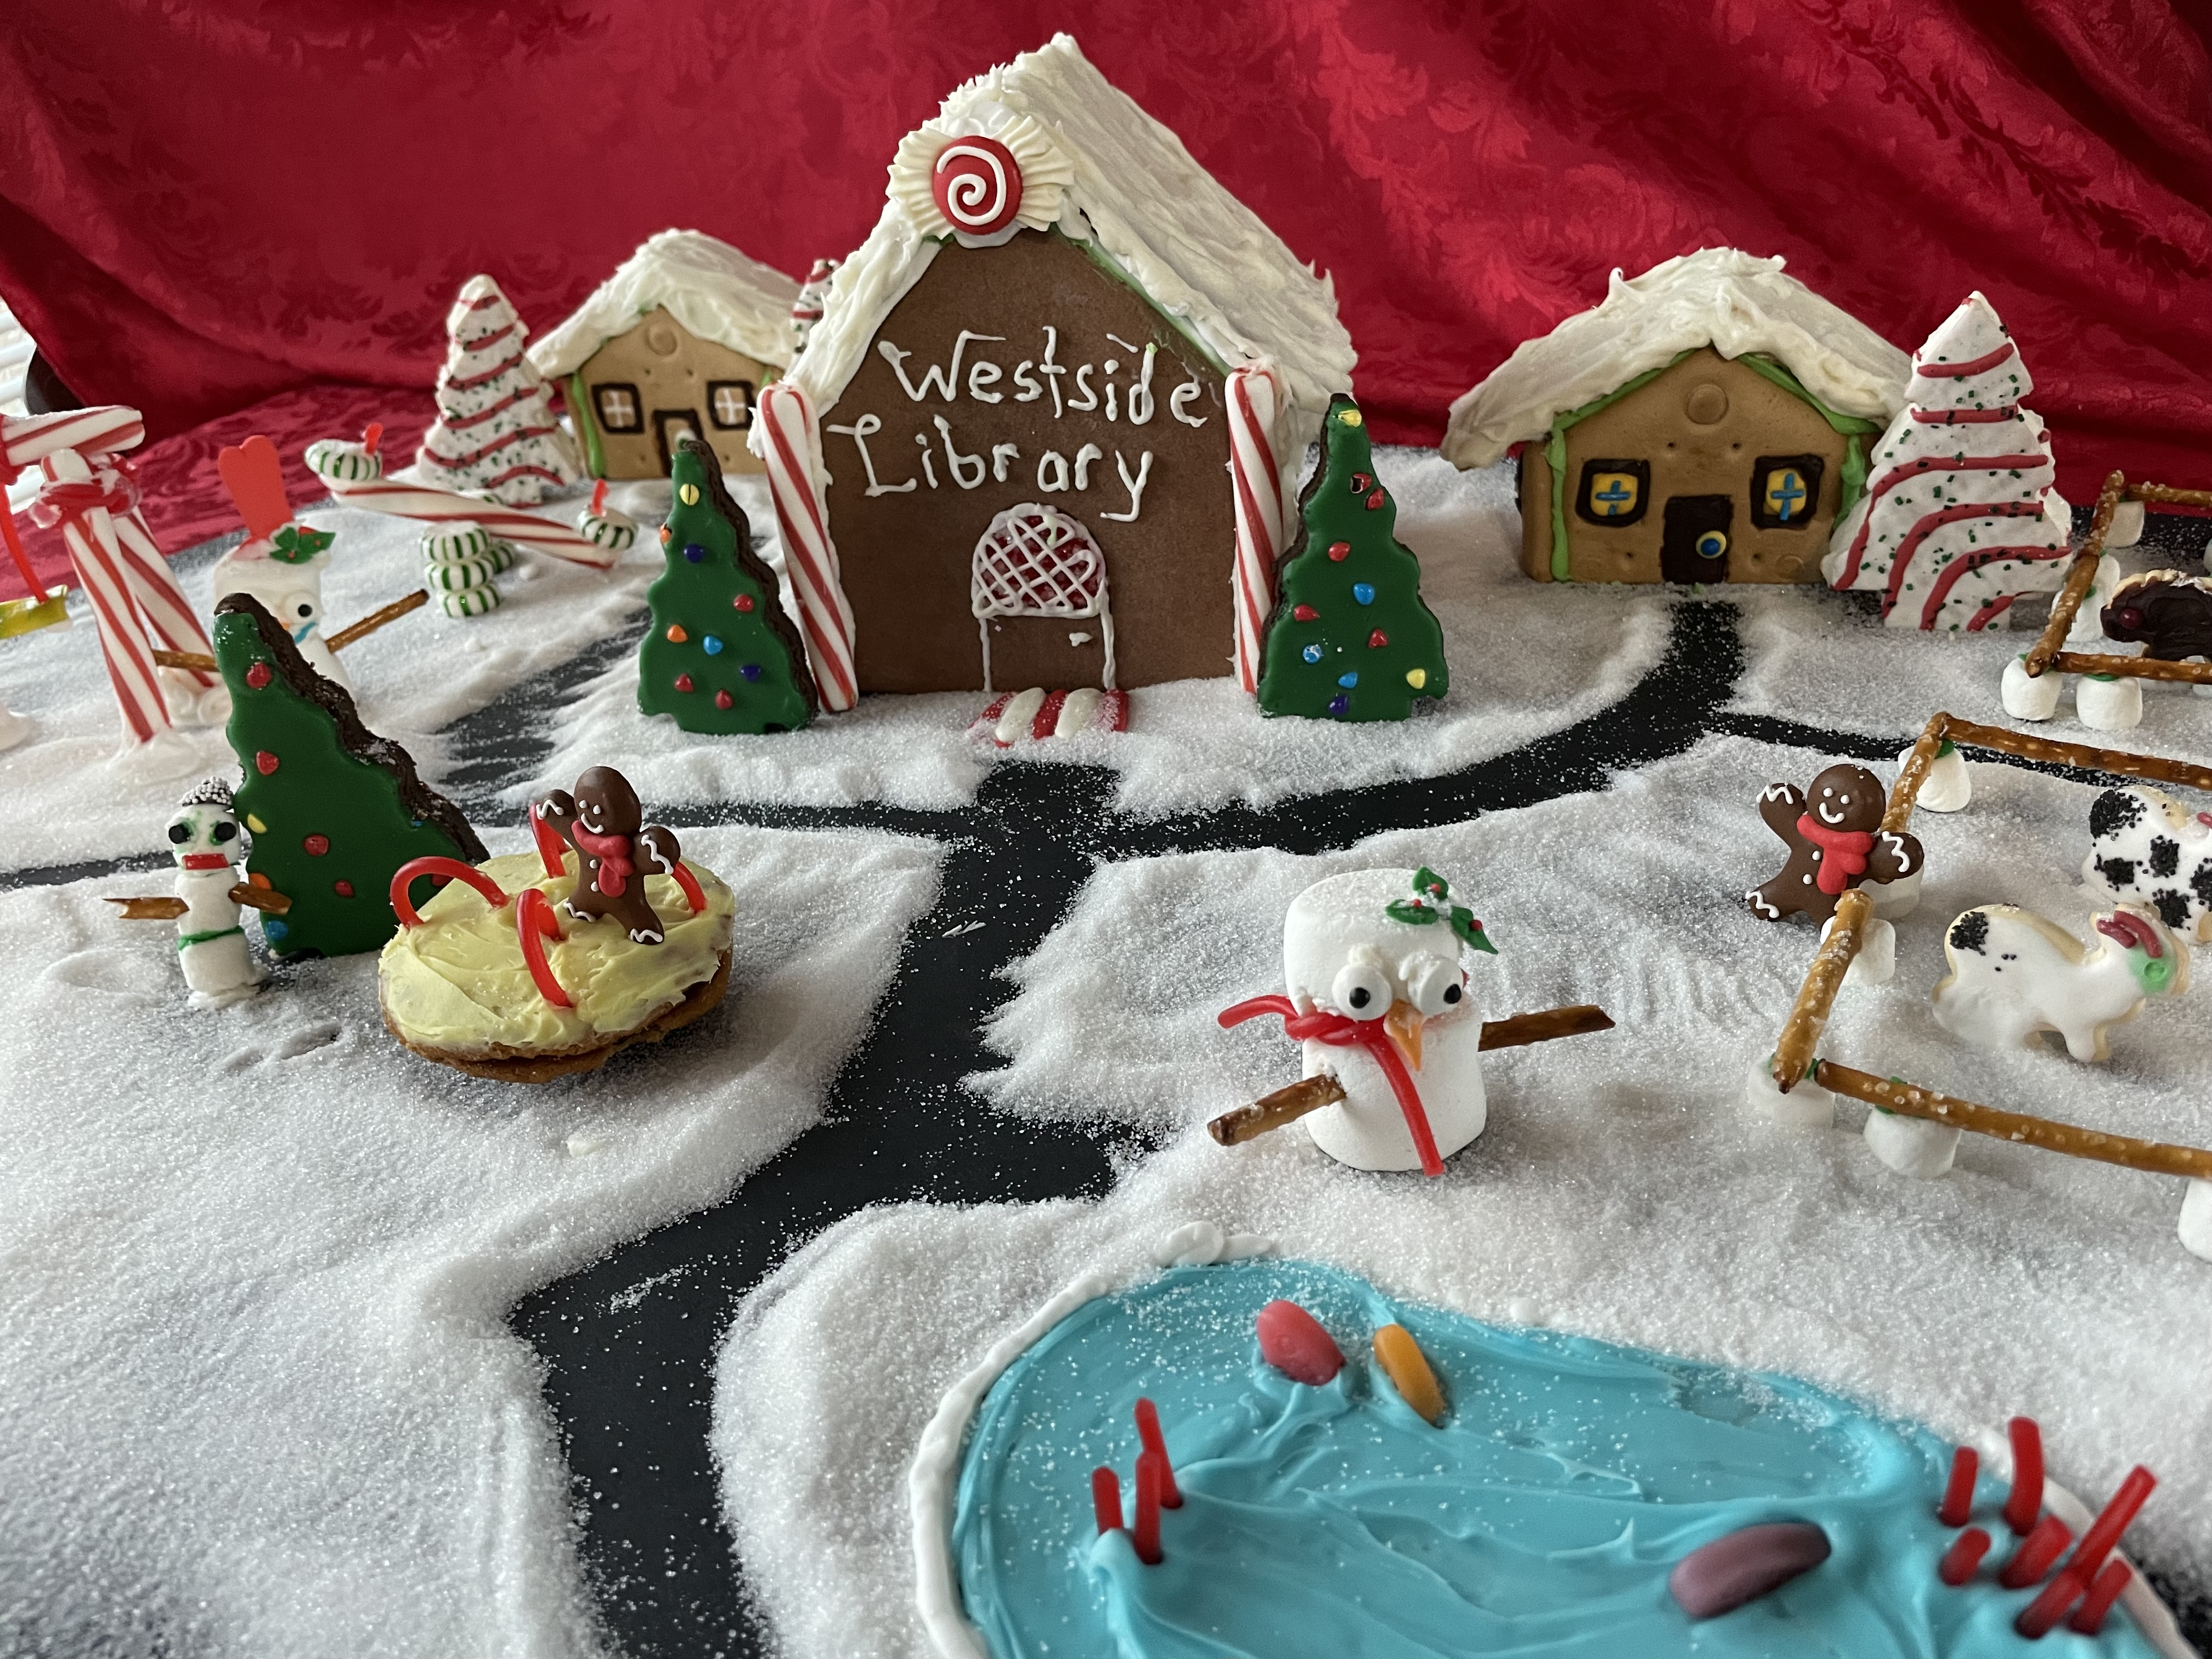 A gingerbread library says "Westside Library" and has a pond, two smaller buildings, and a zoo with marshmallow animals.